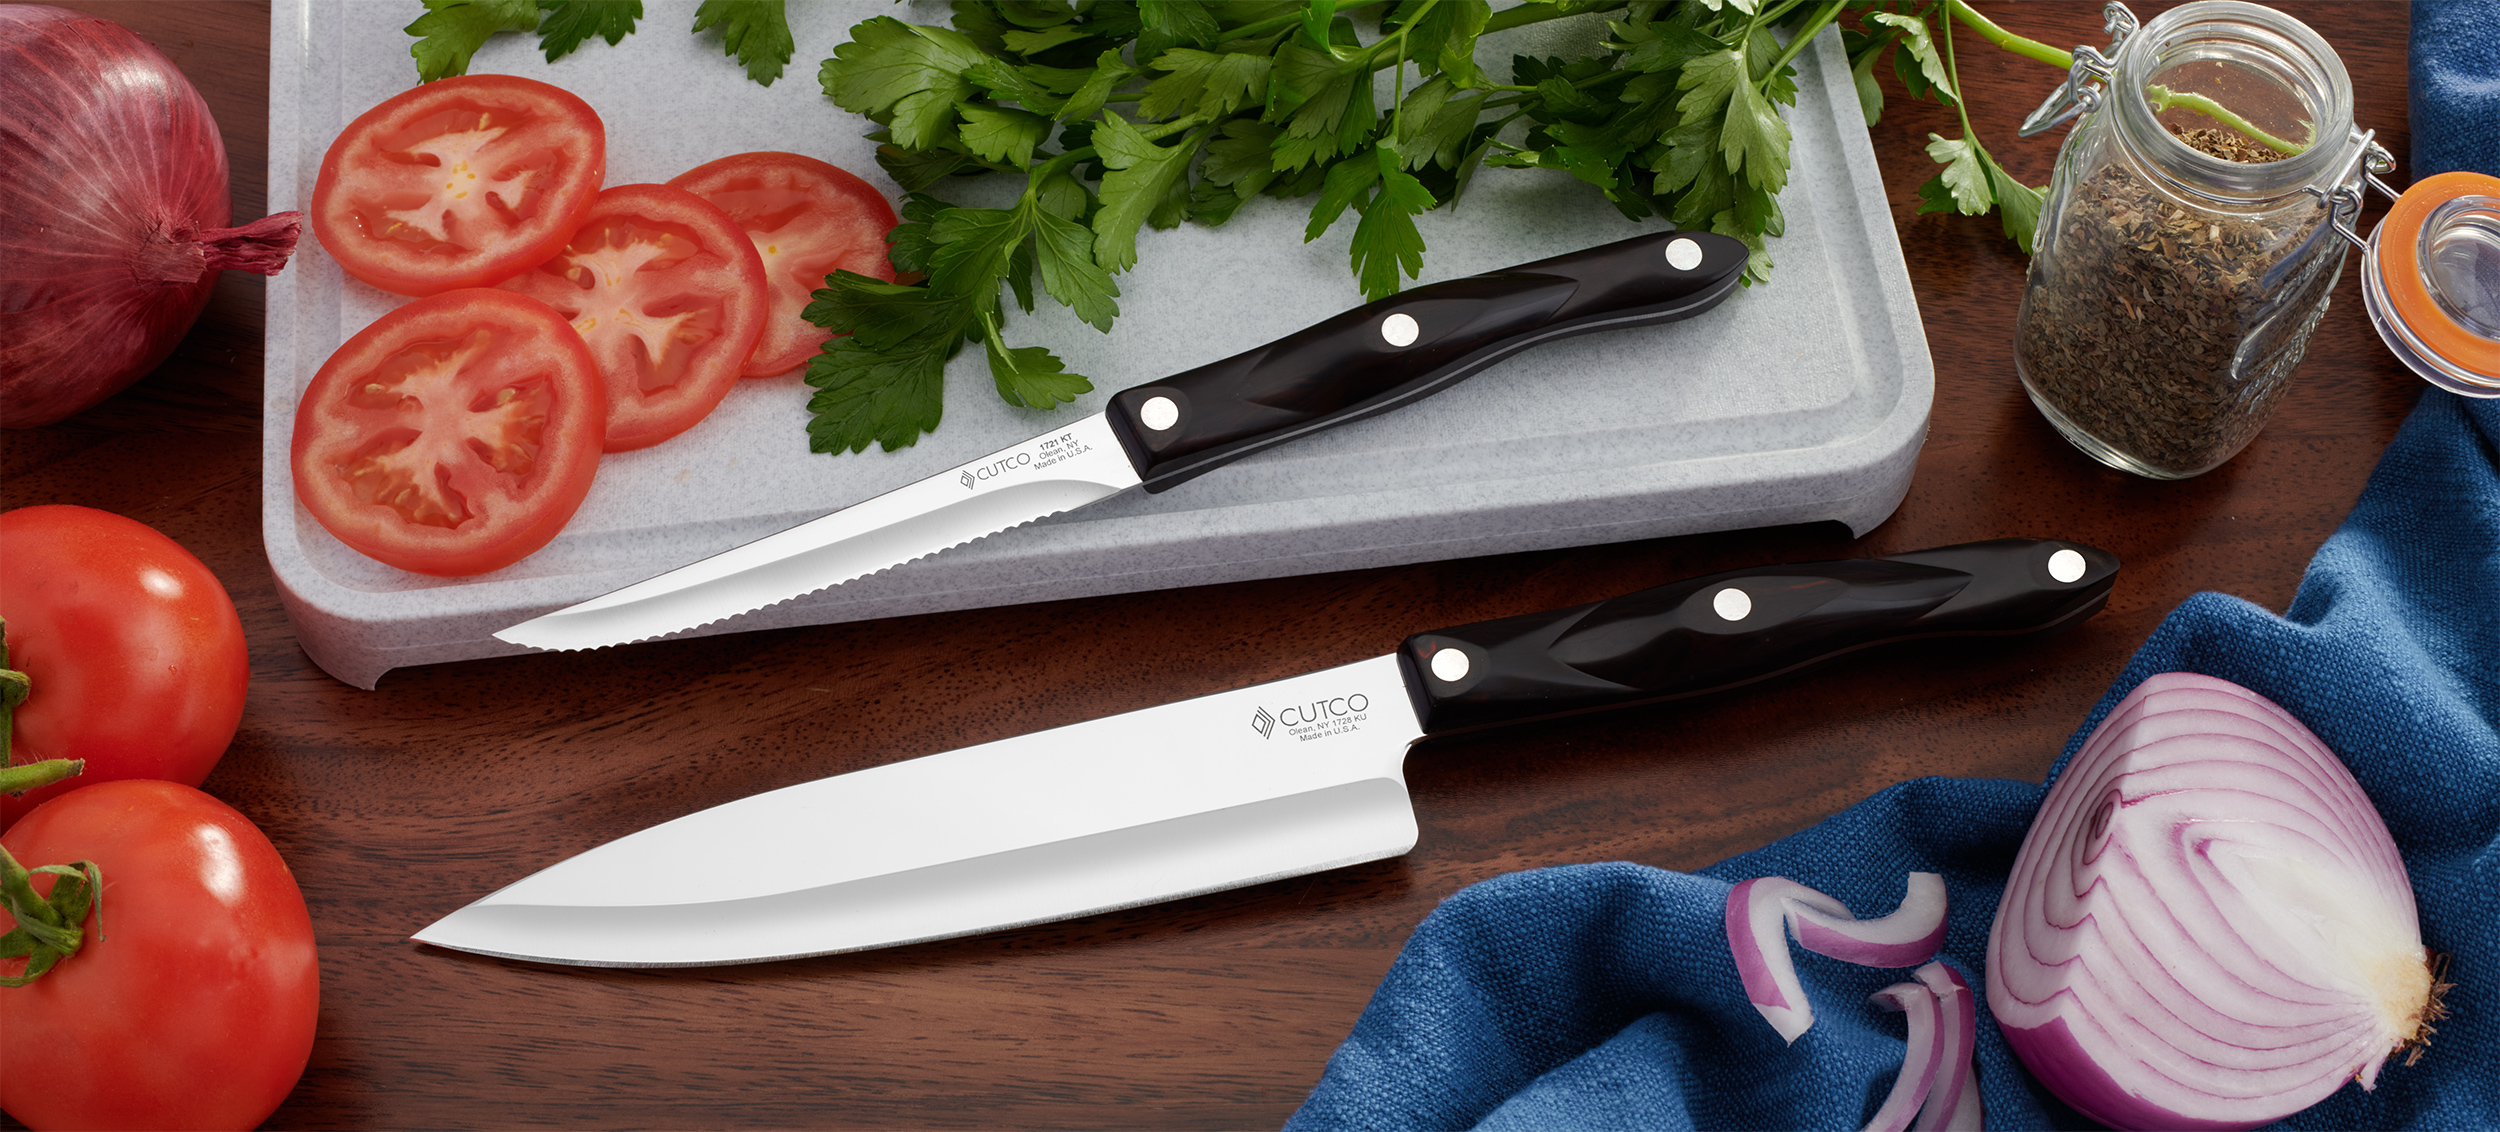 Cutco Knives with cut fruits and vegetables